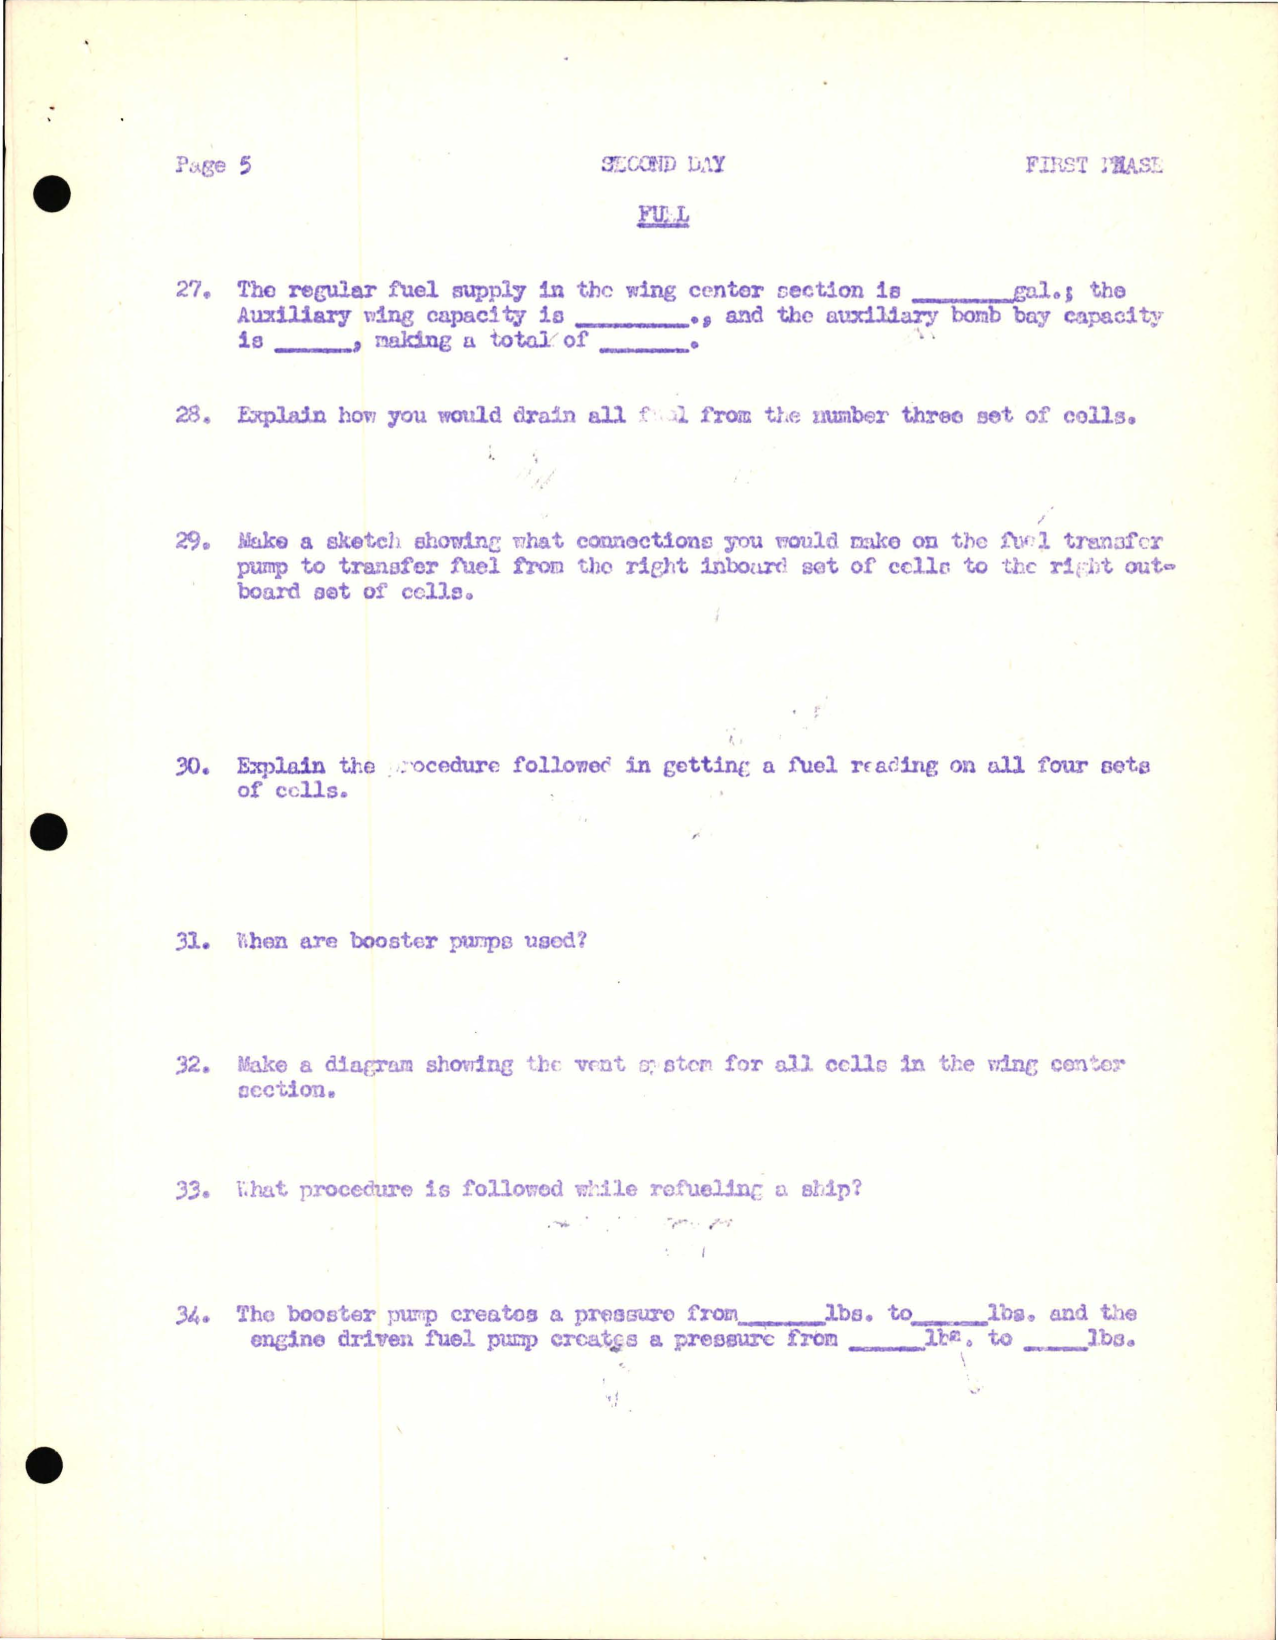 Sample page 5 from AirCorps Library document: Study Guide for Induction System of the B24-D Including Fuel and Oil - Consolidated Aircraft, First and Second Phase